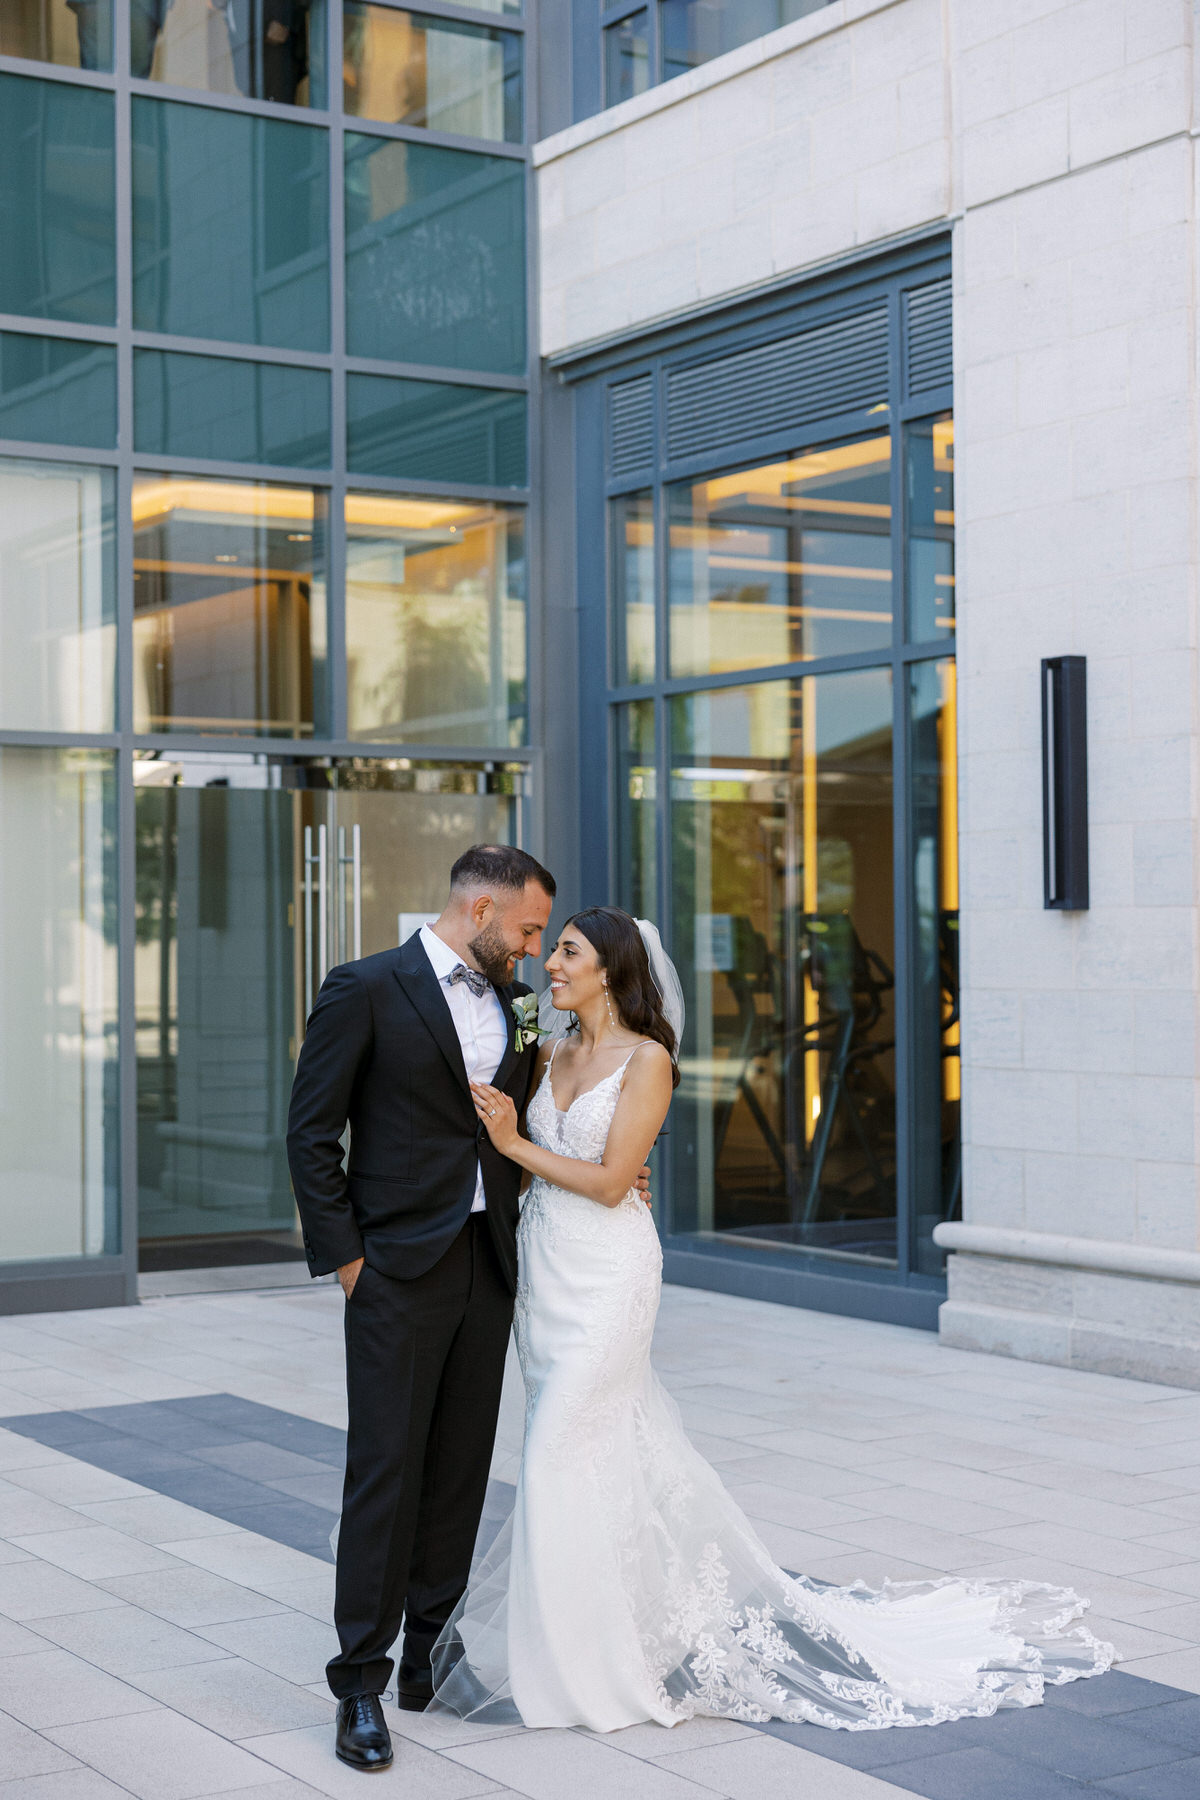 Bride & Groom At The Pearle Hotel For Outside Photos on Their wedding day as they look romantically at each other.